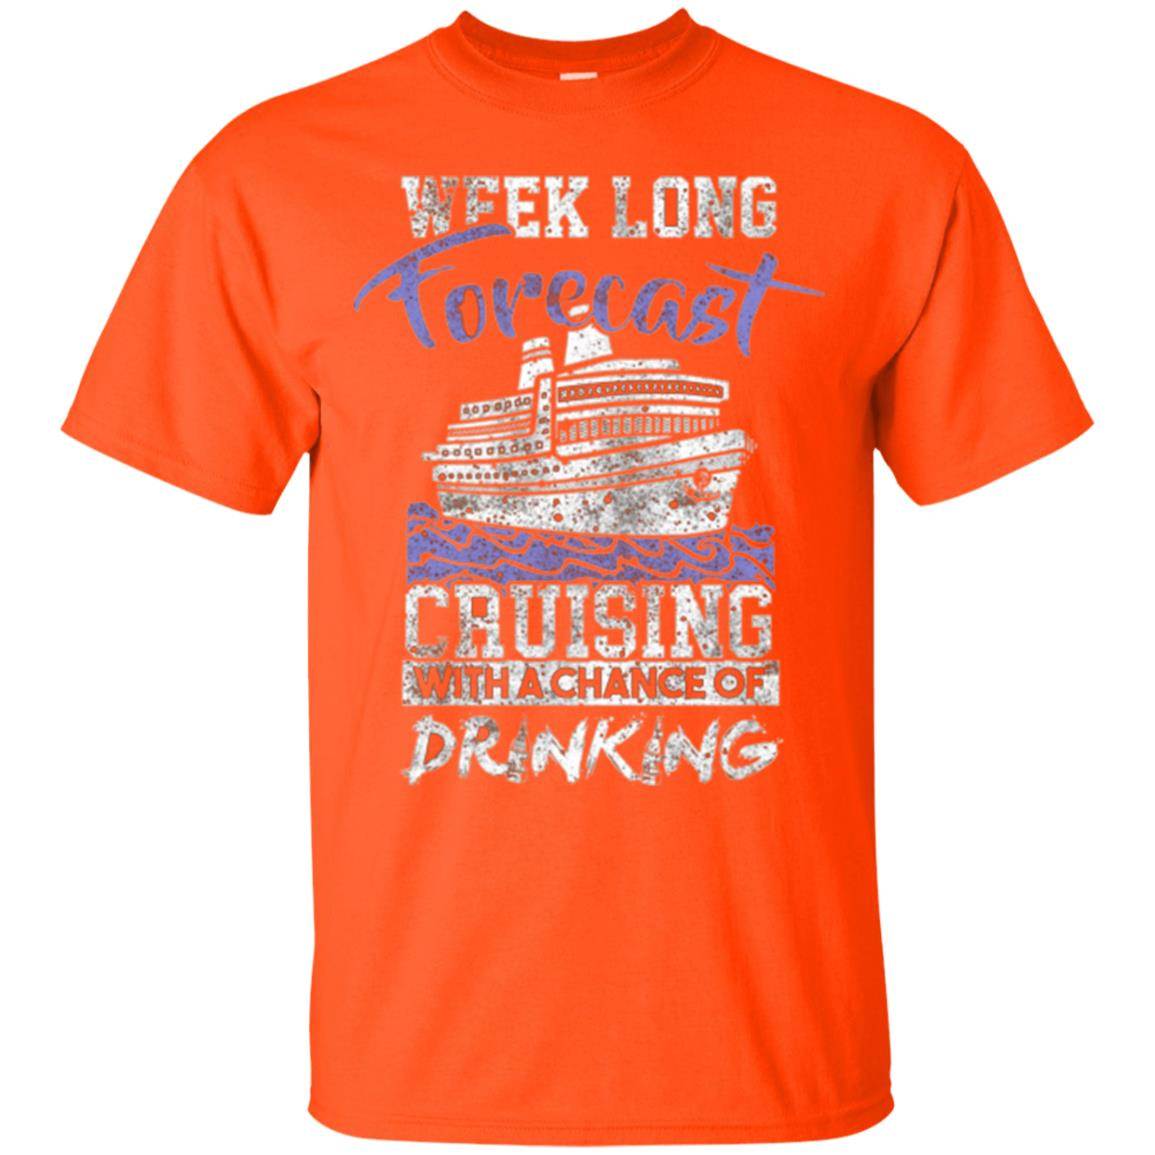 Inktee Store - Week Long Forecast Cruising With A Chance Of Drinking Men’s T-Shirt Image